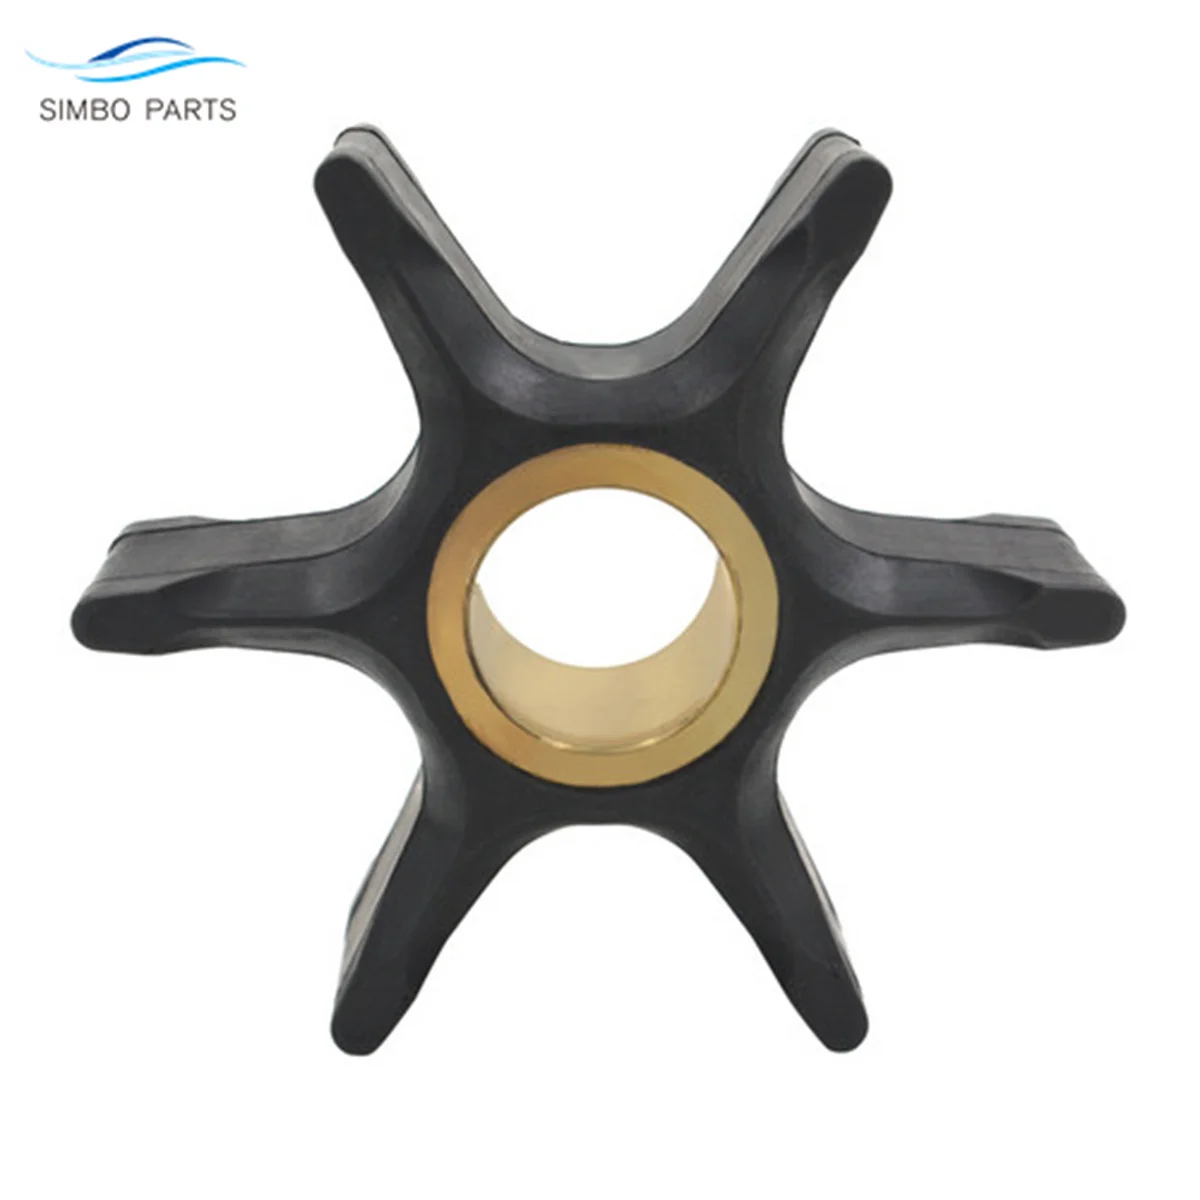 

395864Water Pump Impeller For Johnson/Evinrude Outboard Motors 397131 435821 389289 391538 394534 435748 439948 5001593 18-3059